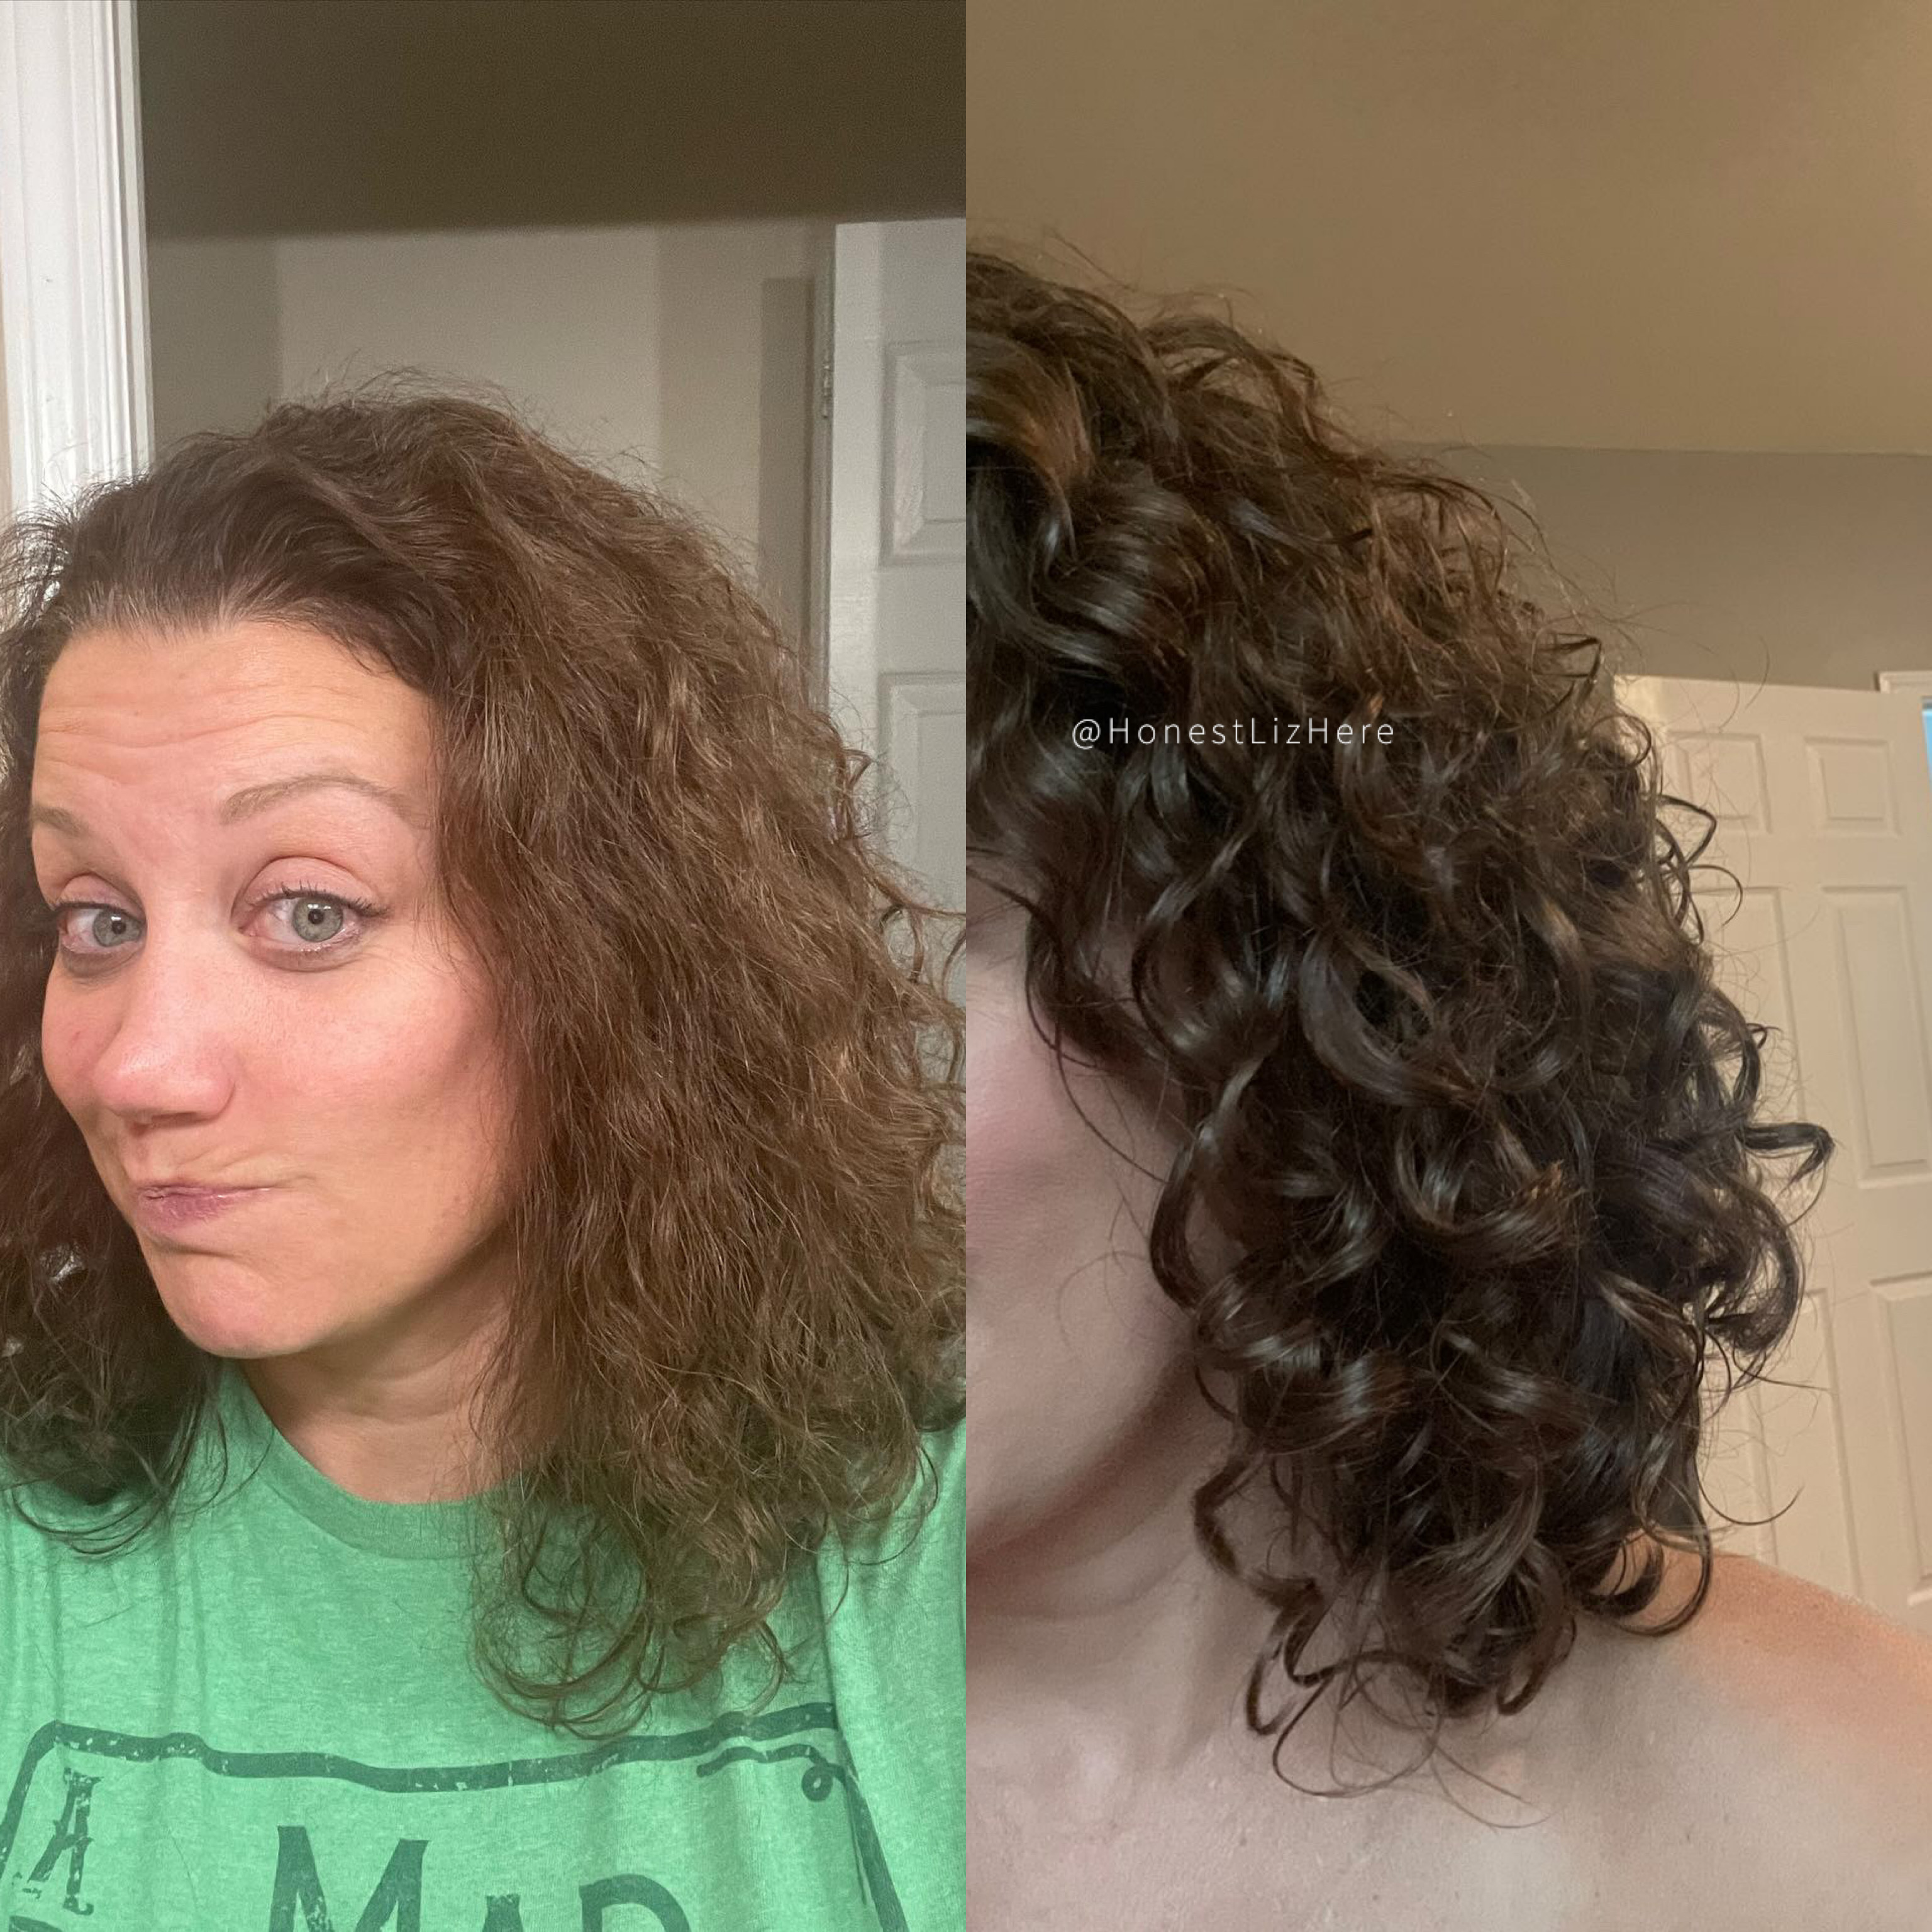 CURLY HAIR BEFORE AND AFTER HONESTLIZ CURL CALL, HONESTLIZ CURL COACHING, HONESTLIZ ONLINE CALL